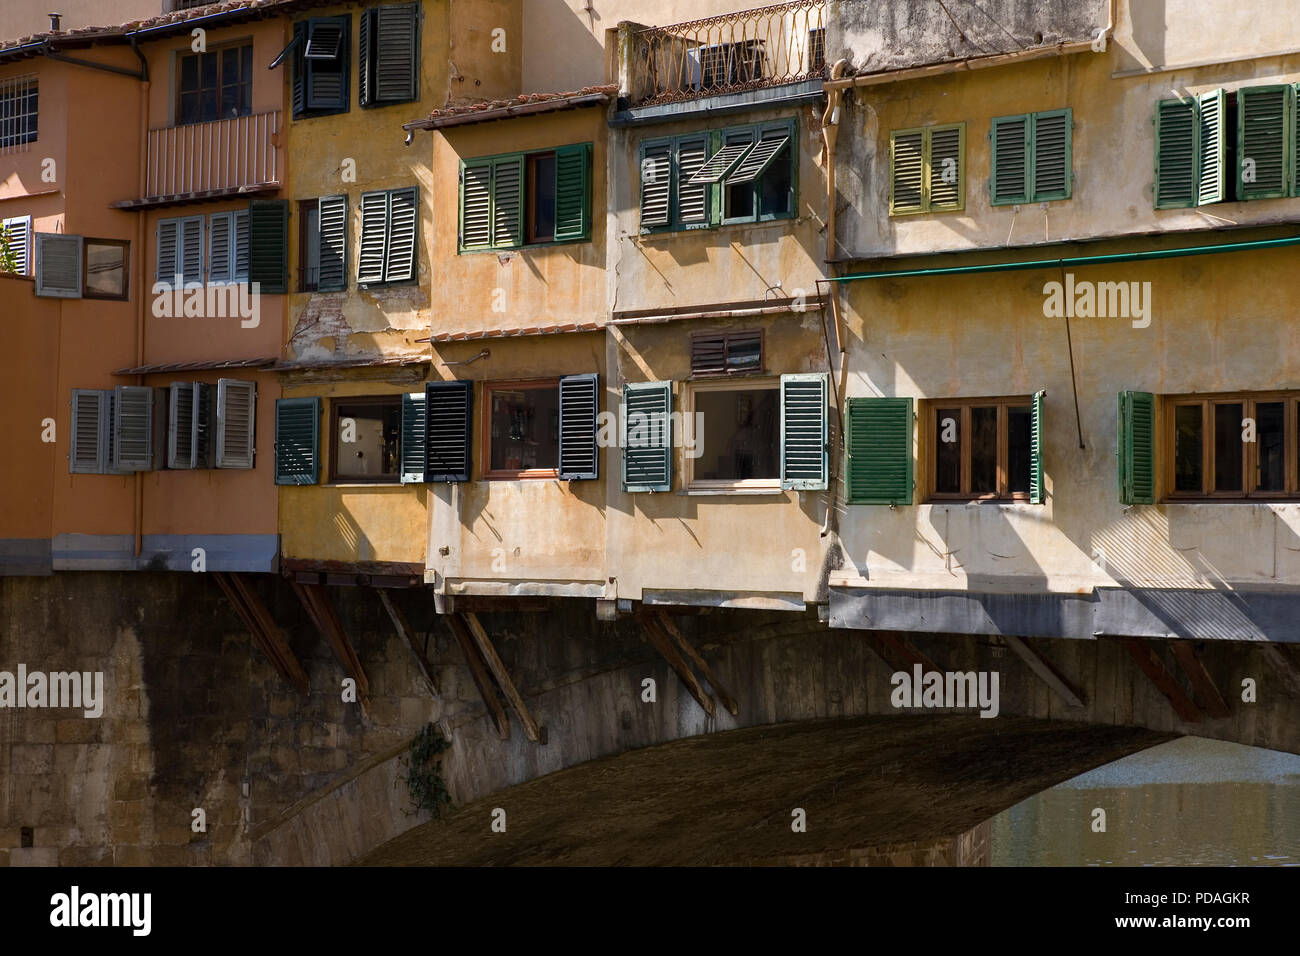 Close-up of the famous Ponte Vecchio spanning the River Arno in Florence Tuscany, Italy: apartments built on the bridge. Stock Photo